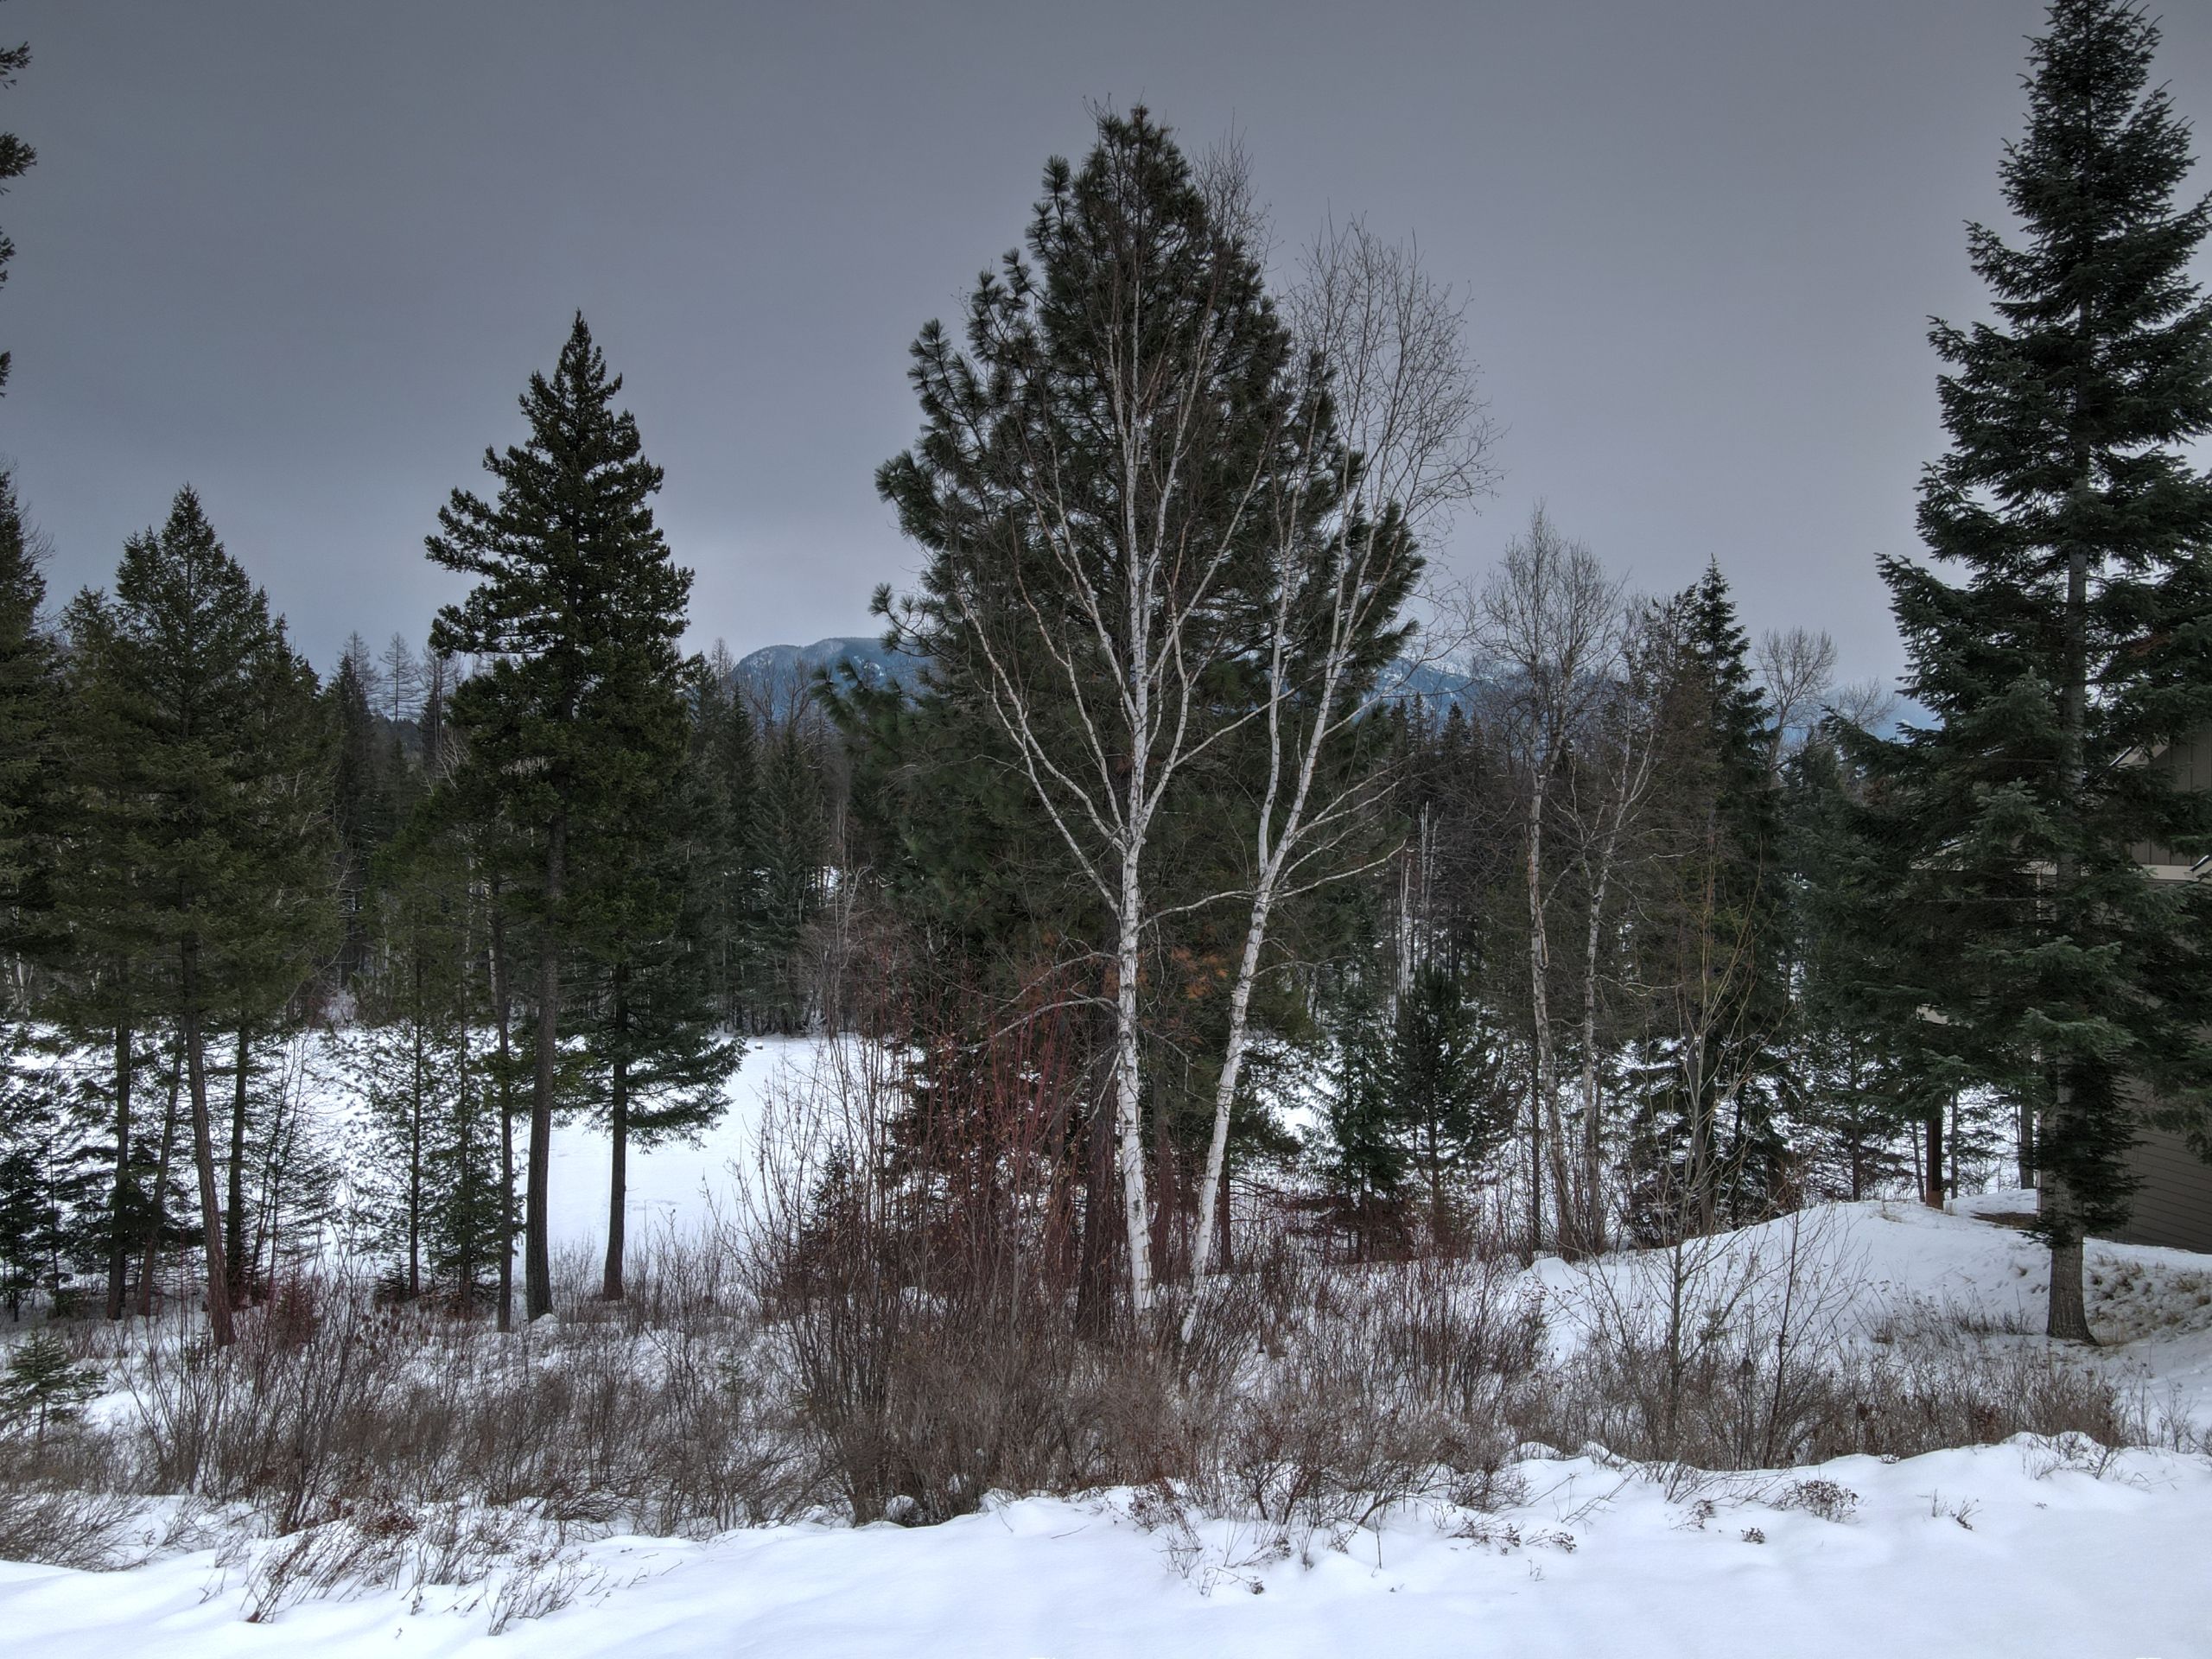 For Sale: 301 Gleneagles Trail Columbia Falls MT (Land) photo of land with mountains in back.